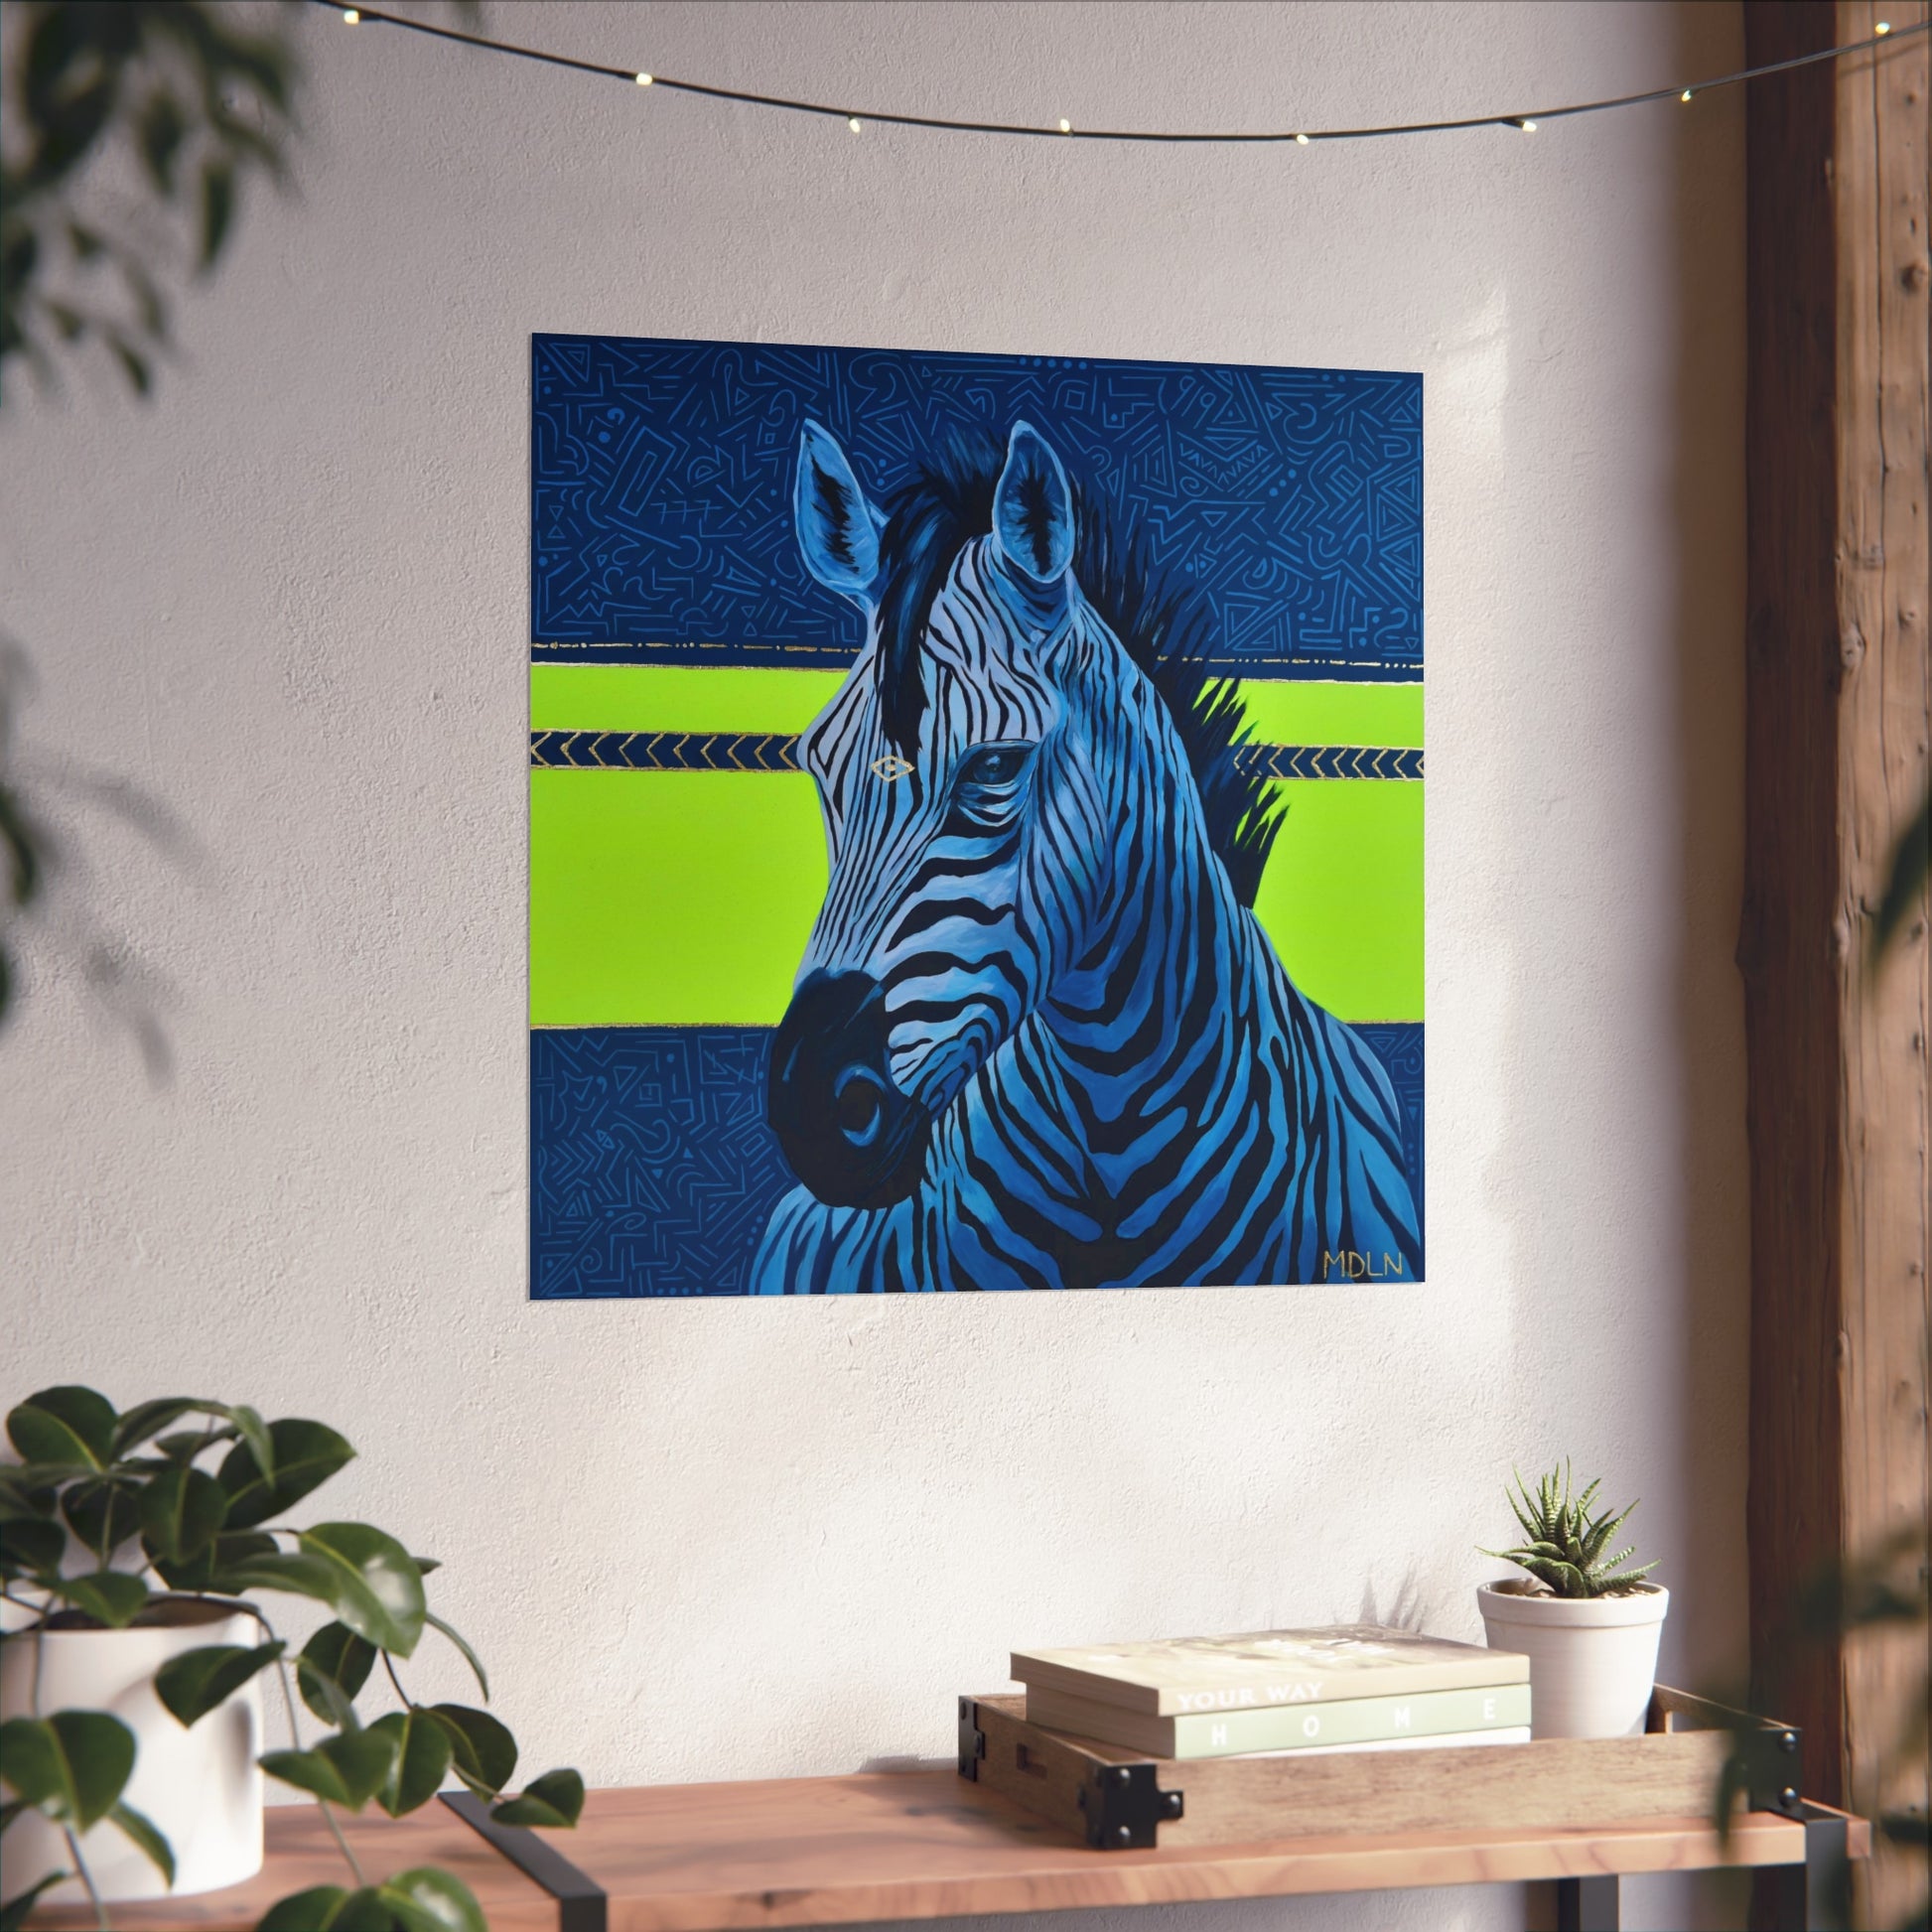 A bright and bold giclee art print of a majestic zebra painting with blue and neon yellow abstract background, zebra art hanging on a wall over a wooden table